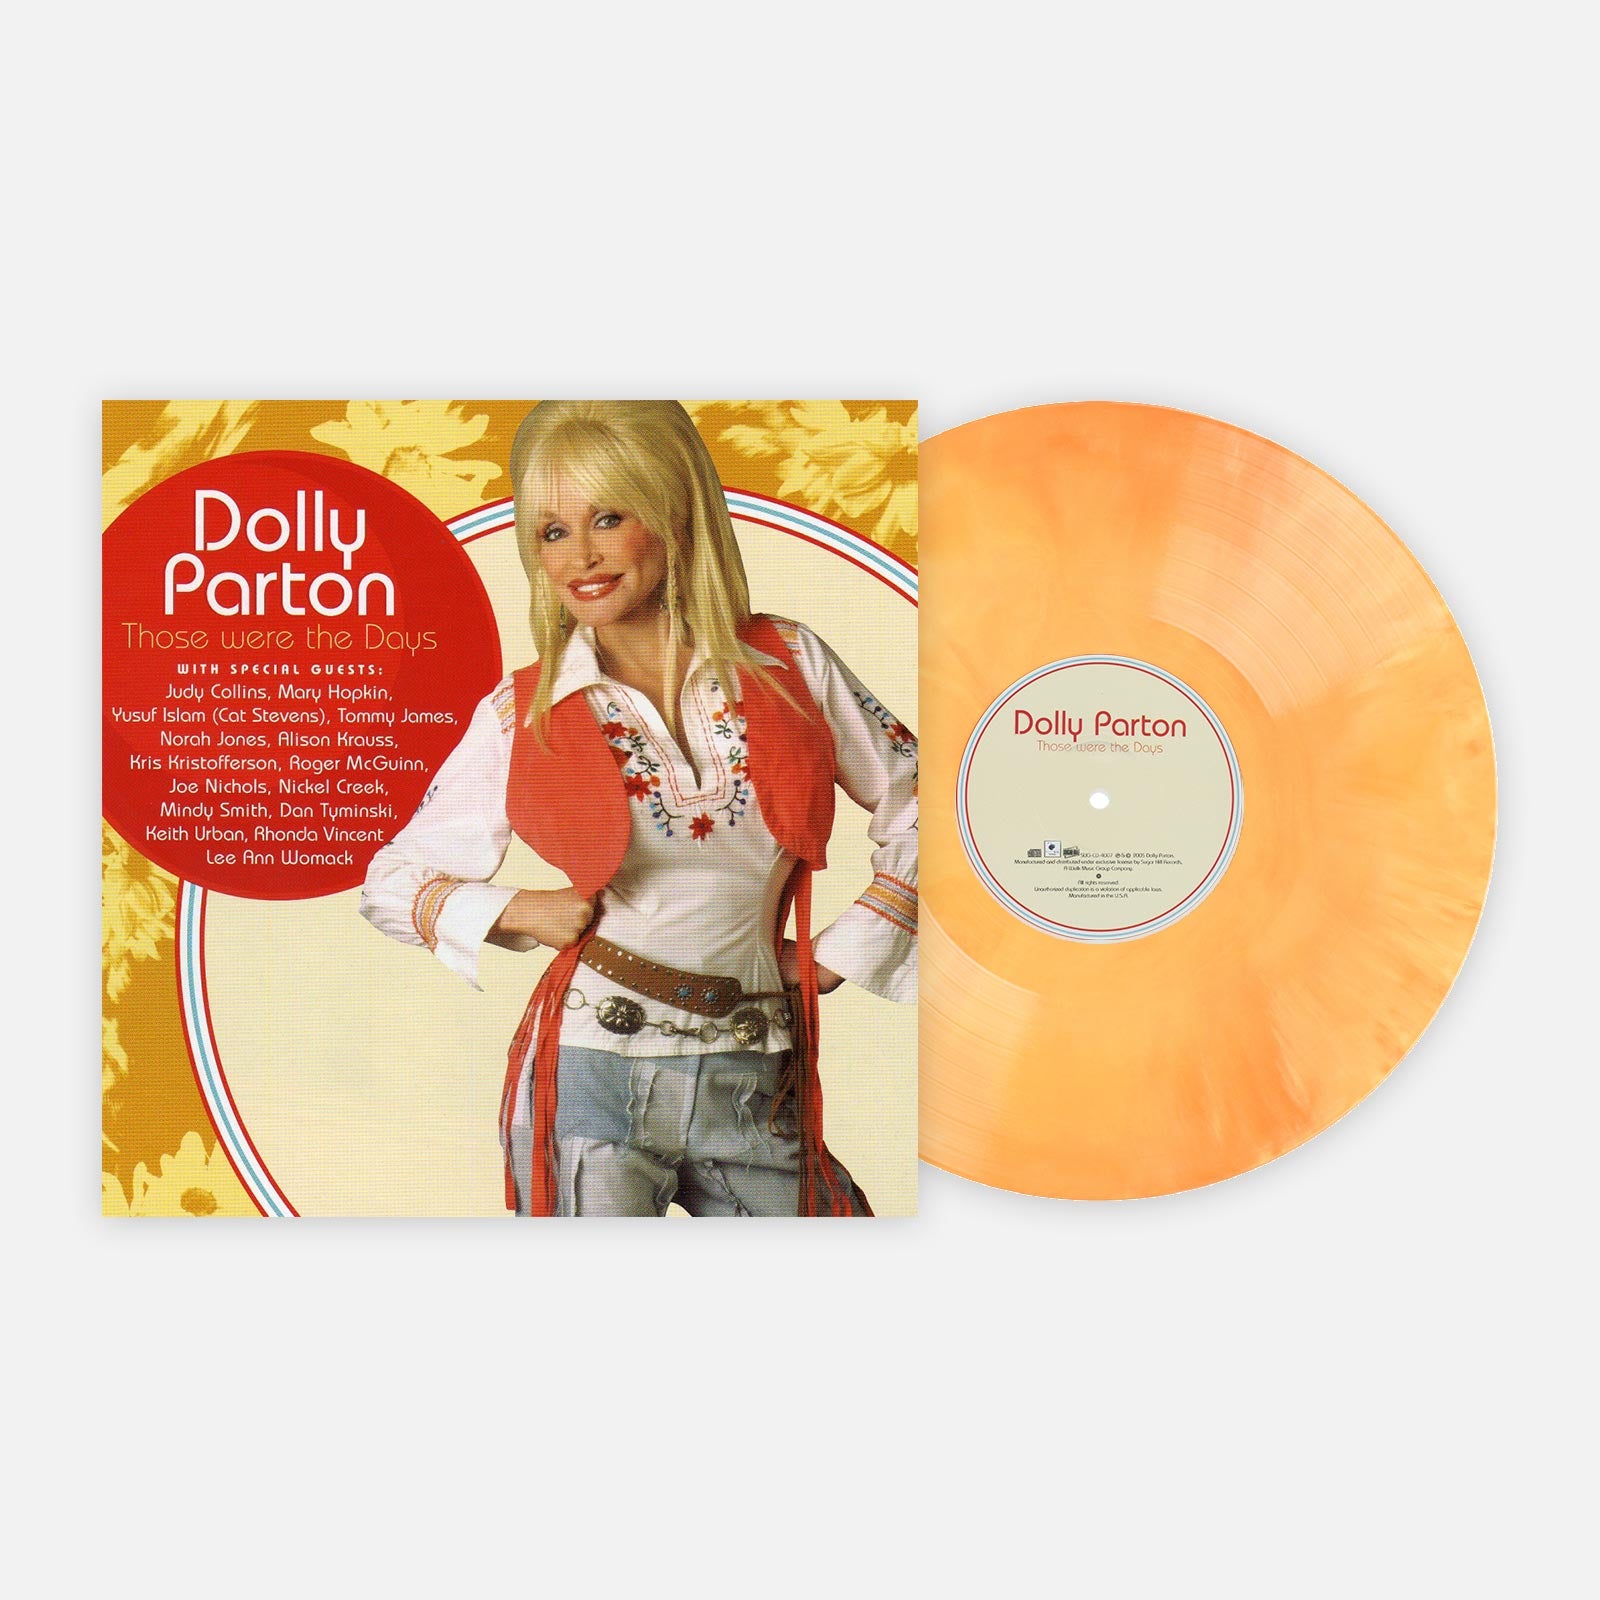 Dolly Record Of The Month Subscription Coming To Vinyl Me, Please 